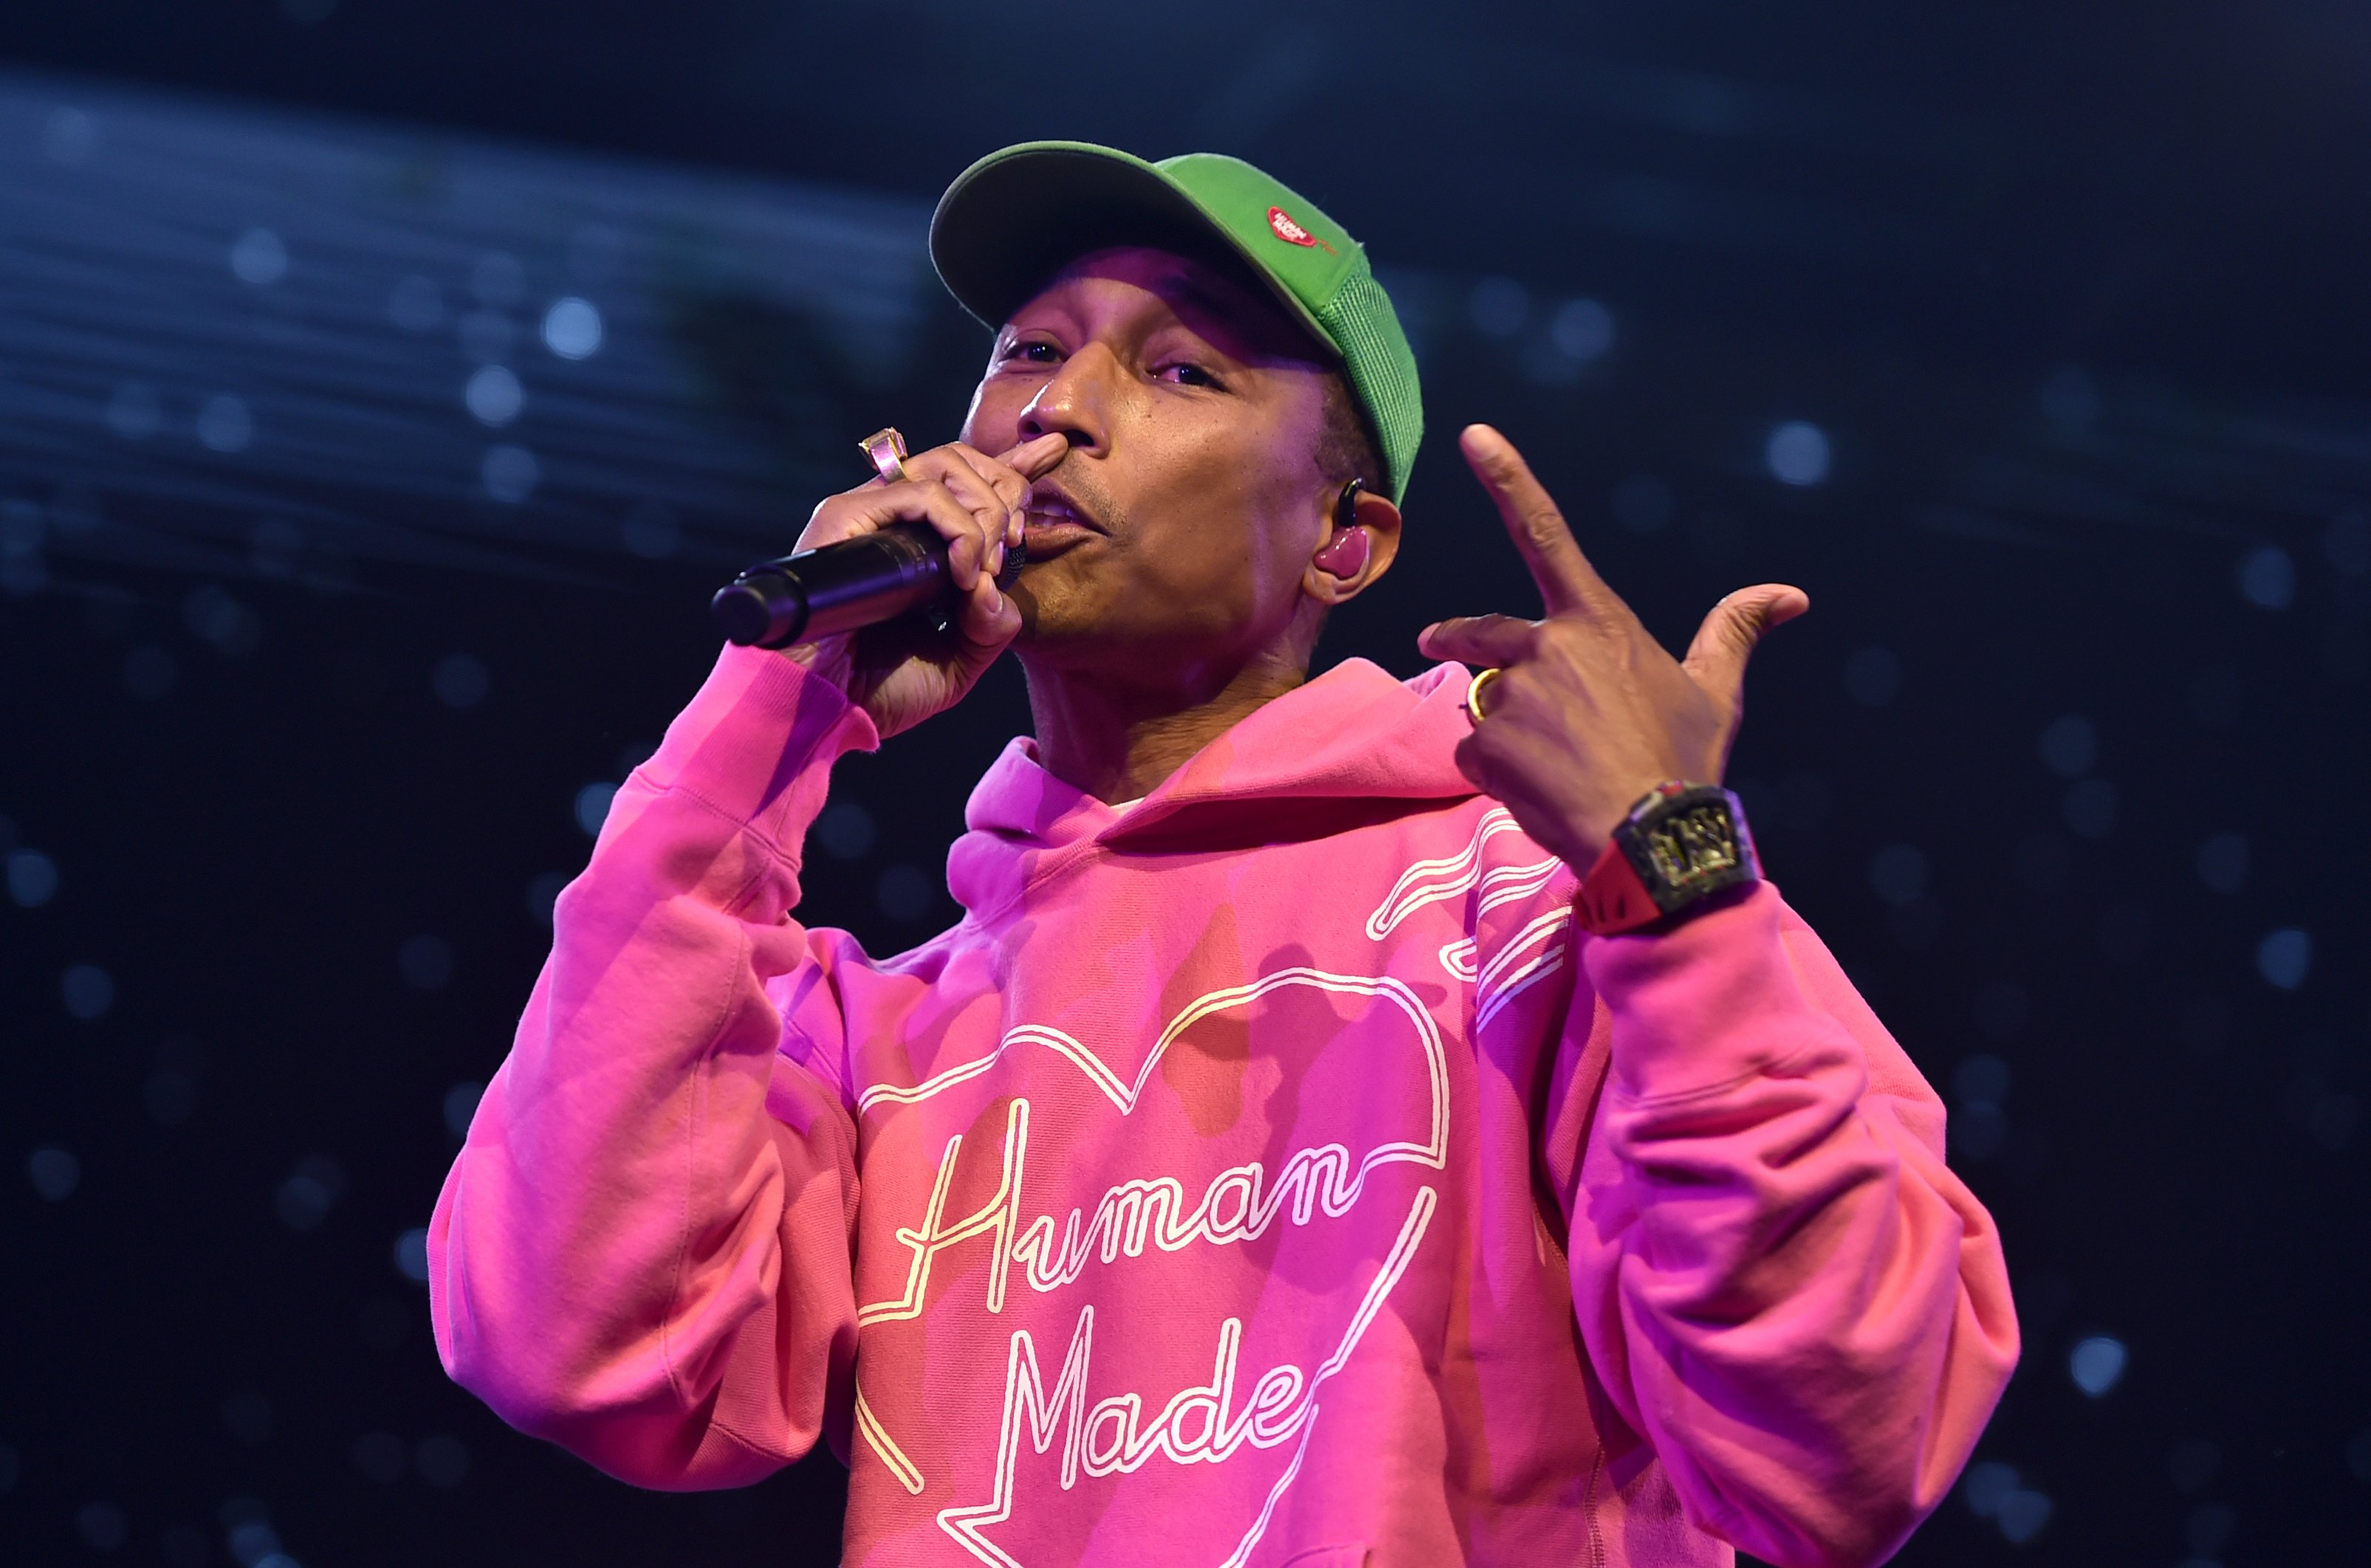 Pharrell Demands President Trump Stop Playing 'Happy' at His Political Rallies - DaMusicHits